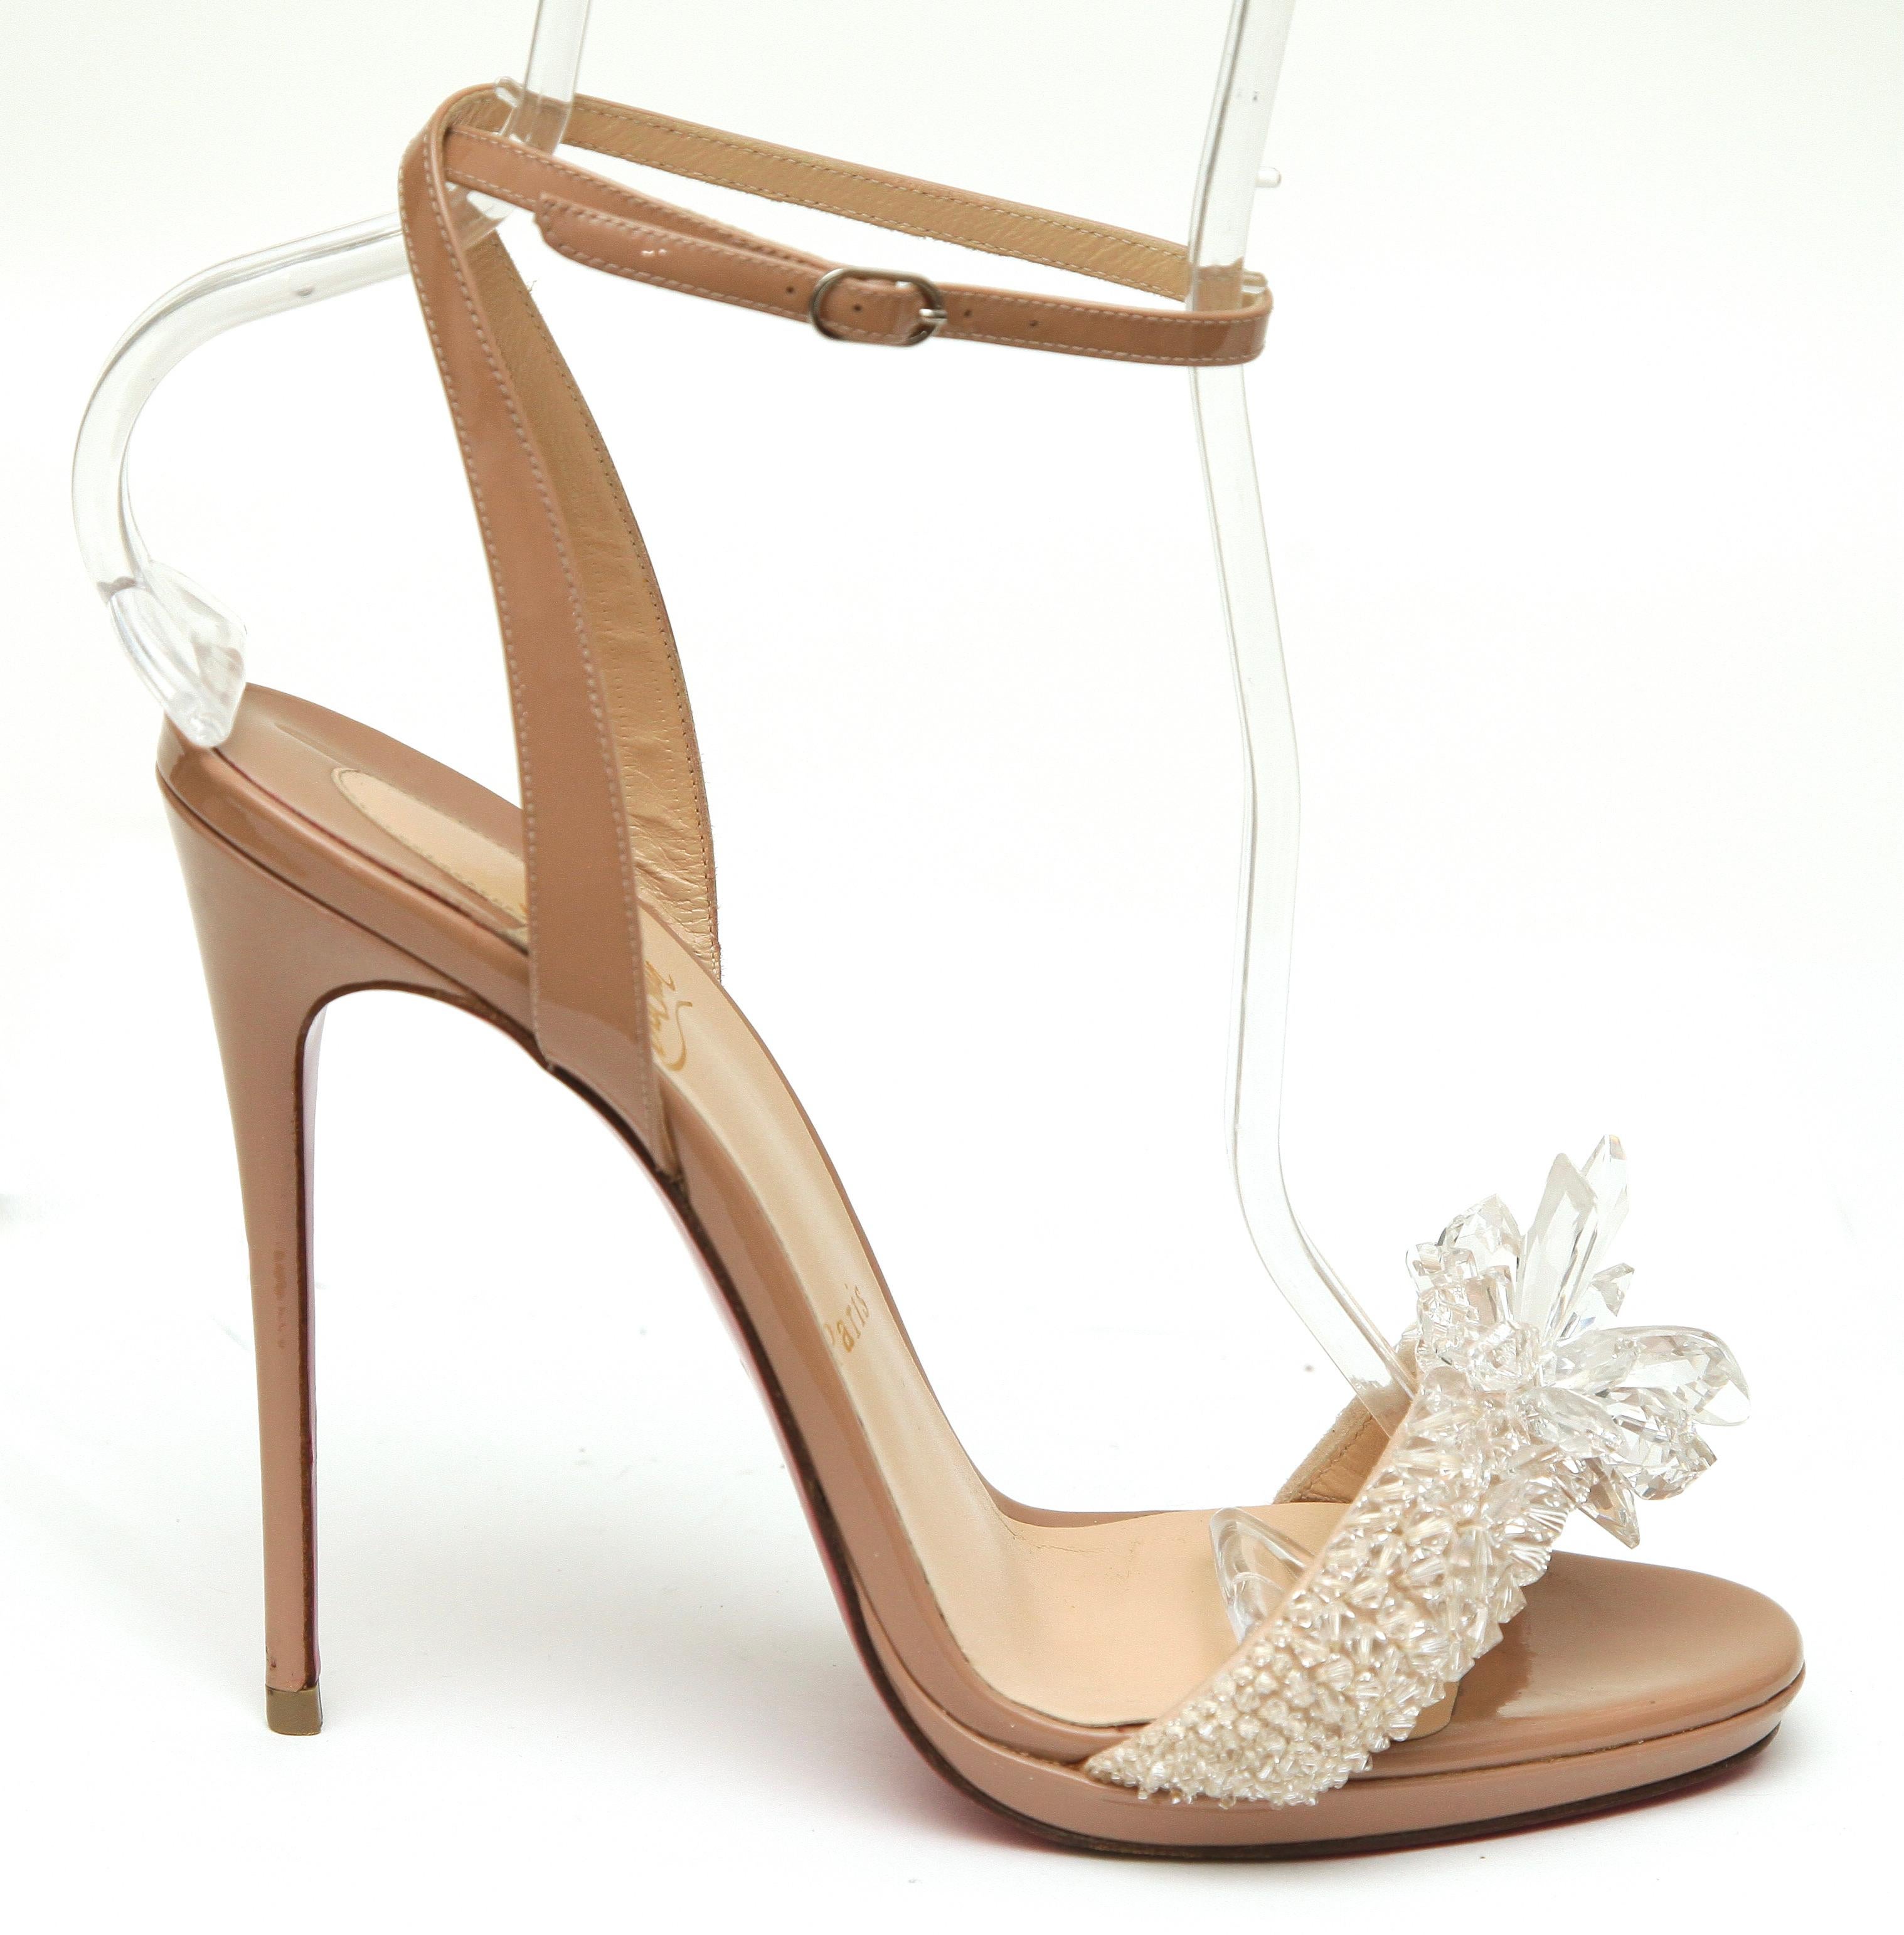 CHRISTIAN LOUBOUTIN CRYSTAL QUEEN EMBELLISHED SANDALS


Details:
- Patent leather in a nude-blush color.
- Embellished crystal strap over vamp.
- Almond toe.
- Ankle strap with buckle closure.
- Self covered heels.
- Leather lining and sole.
- Comes